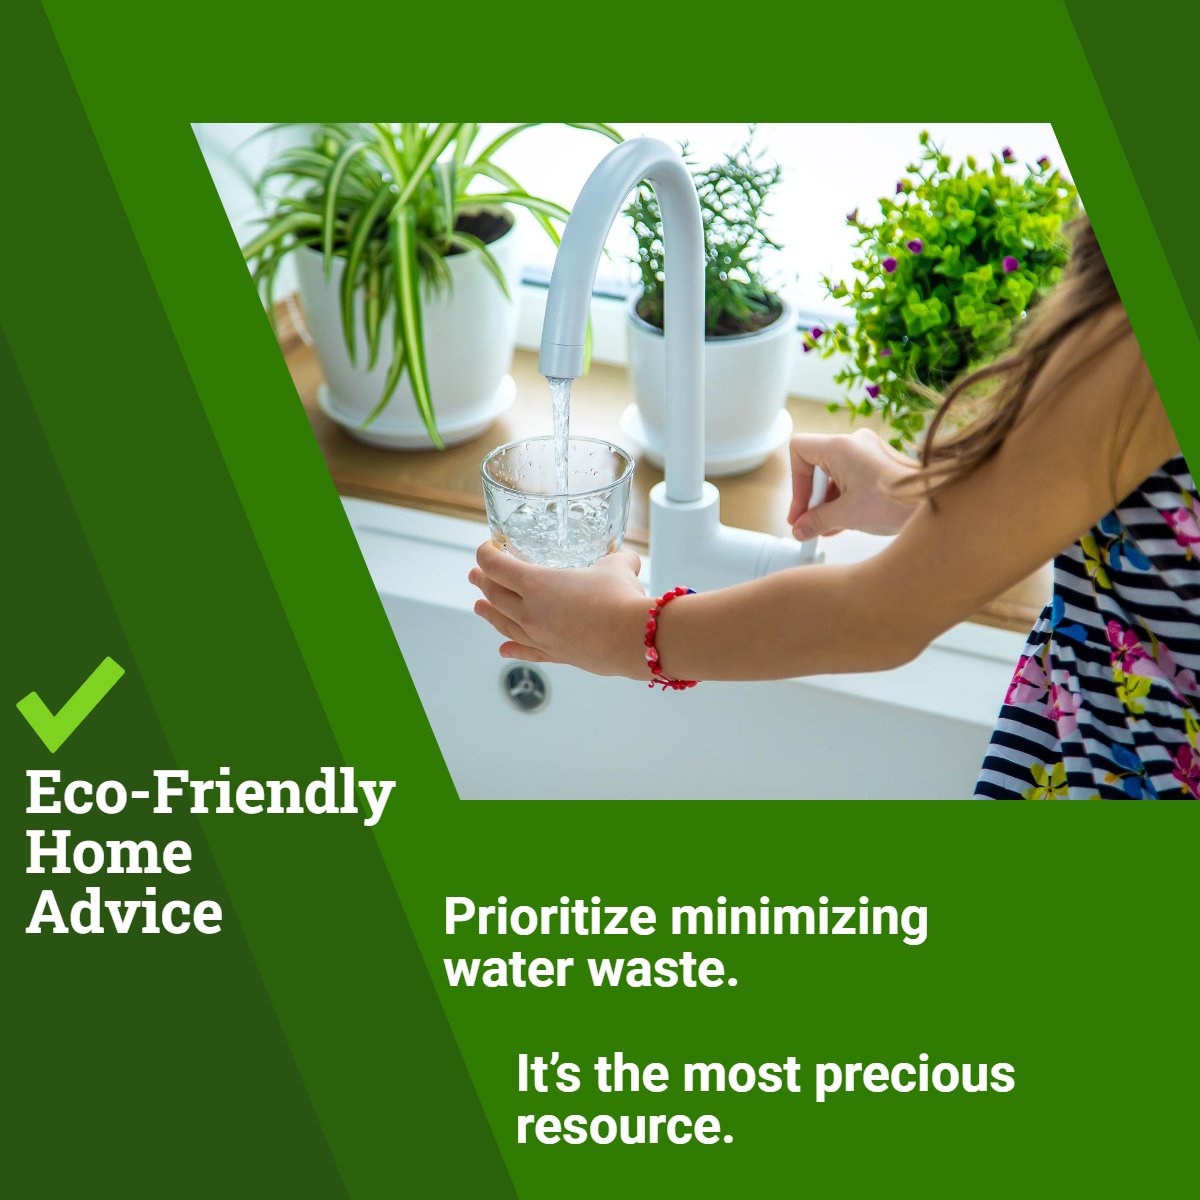 Do you want to reduce your ecological footprint?

Share your own eco-friendly tips 🏡💪 

#EcoFriendlyHome #GreenLiving #SustainableLiving
 #HomeRenovation #RealEstate #HomeForSale #Property #HouseHunting #DreamHome #RealtorLife #NewHome #HomeSweetHome #HouseGoals